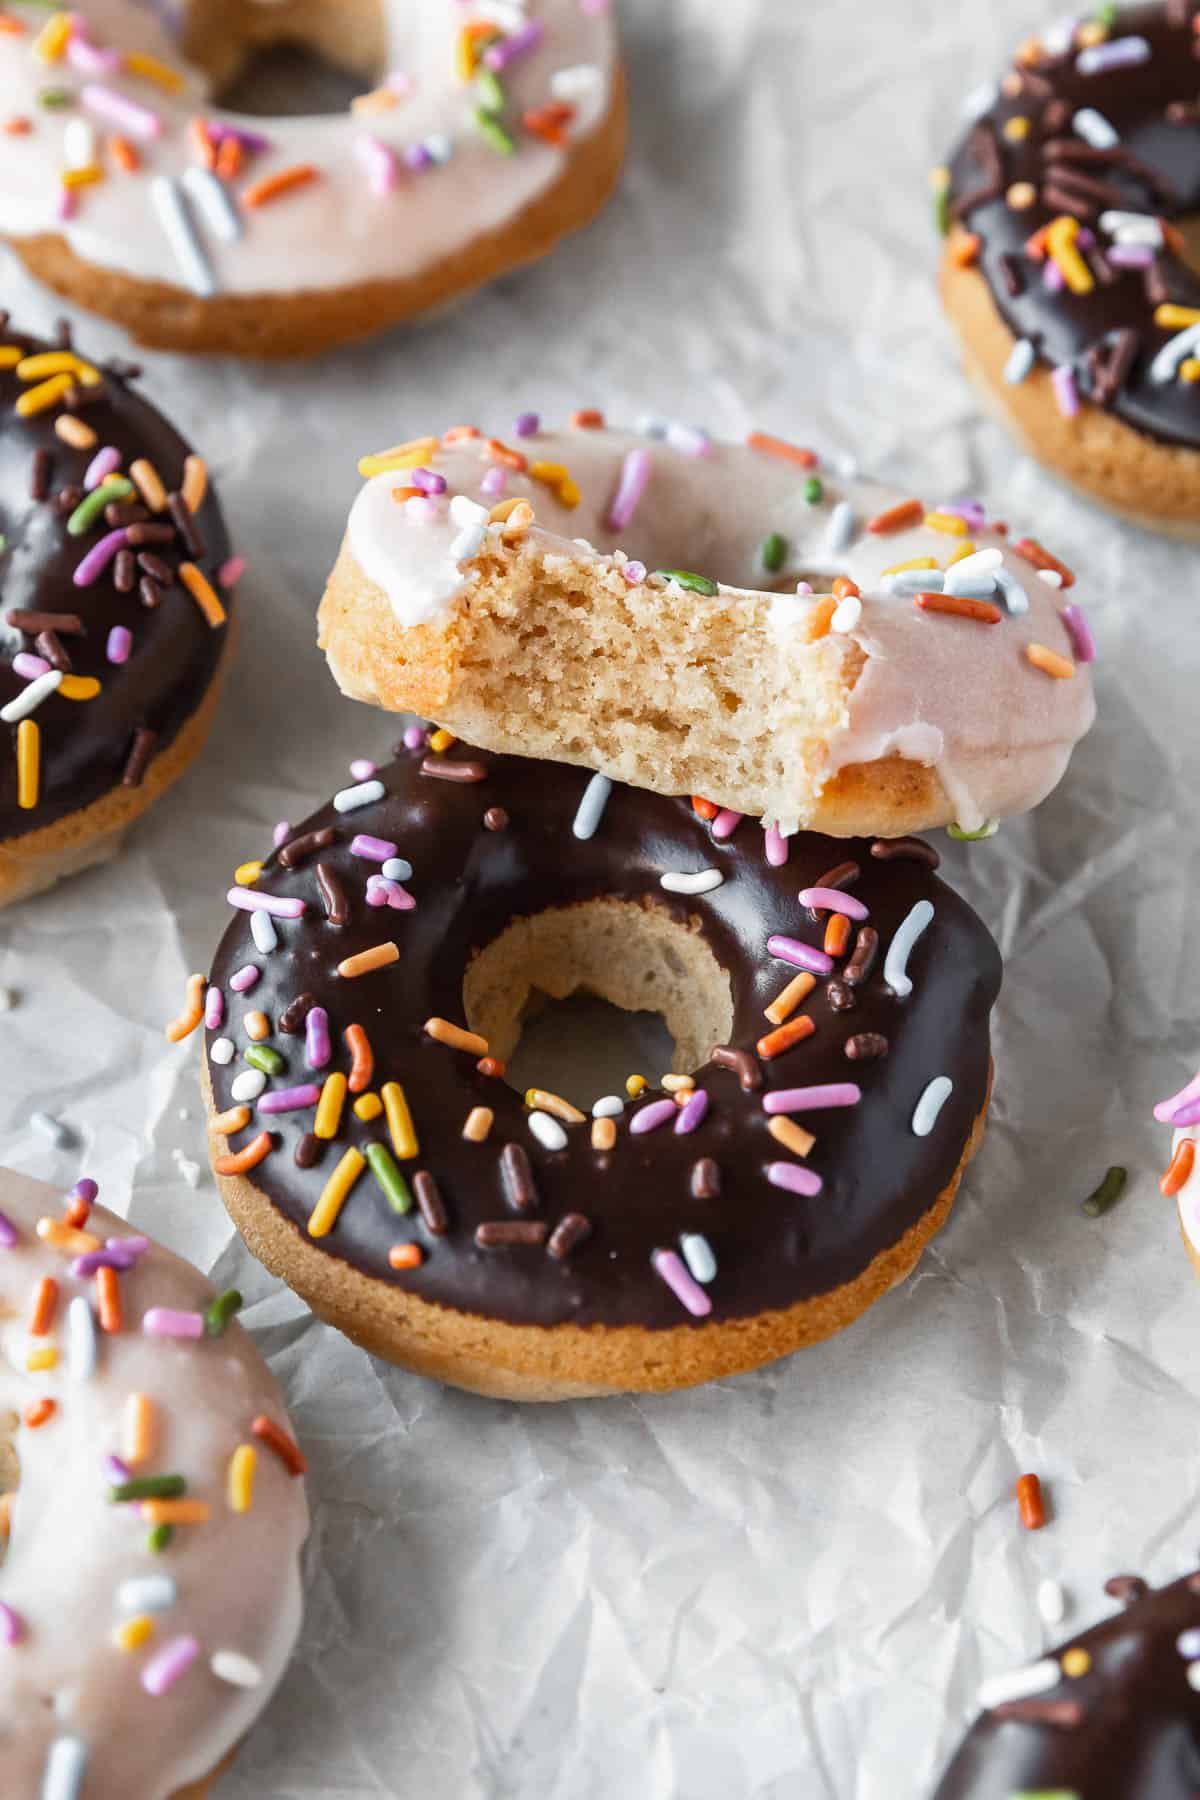 45 degree angle shot of a chocolate glazed and sprinkled donut with a vanilla glazed vegan doughnut with a bite taken out to show the tender crumbed interior.